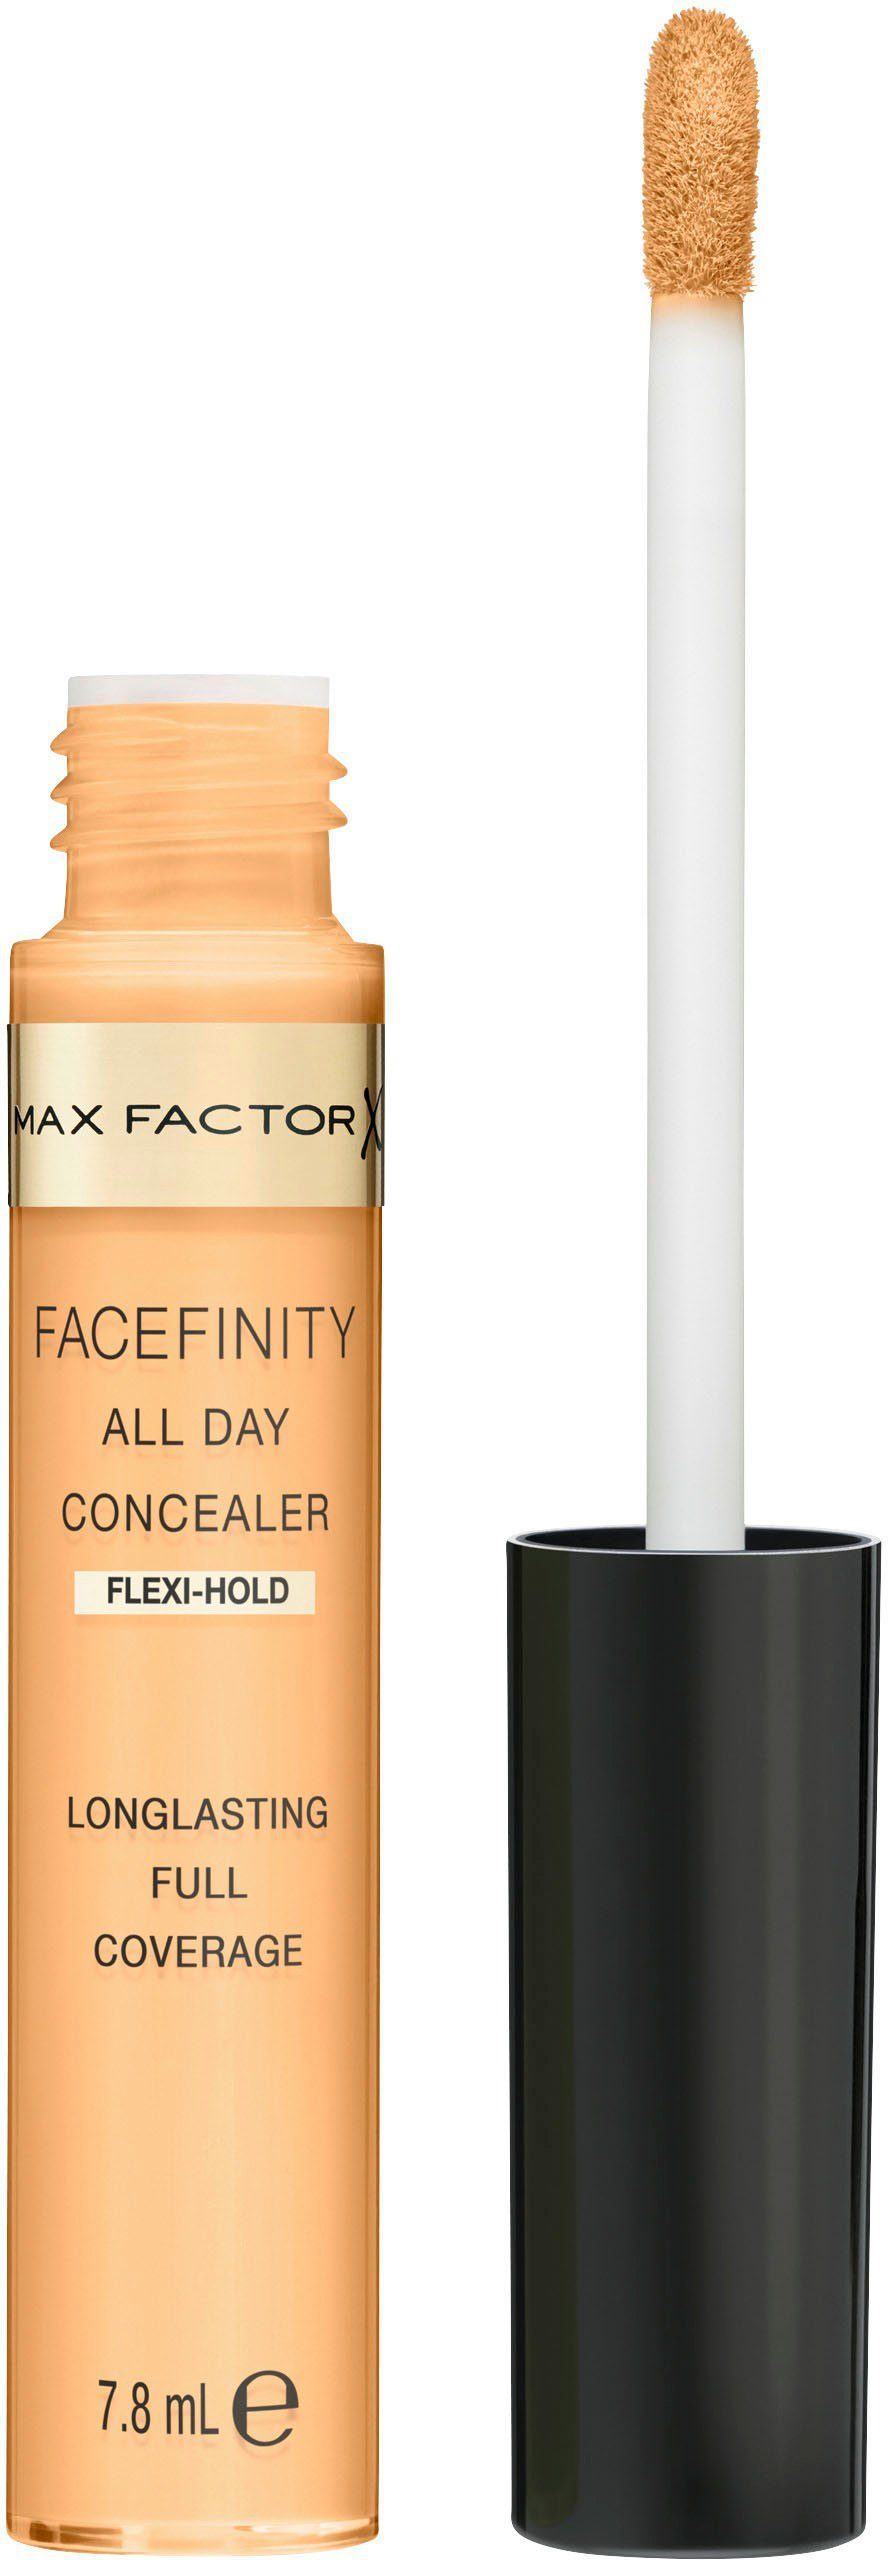 MAX 40 FACTOR All Concealer Day FACEFINITY Flawless